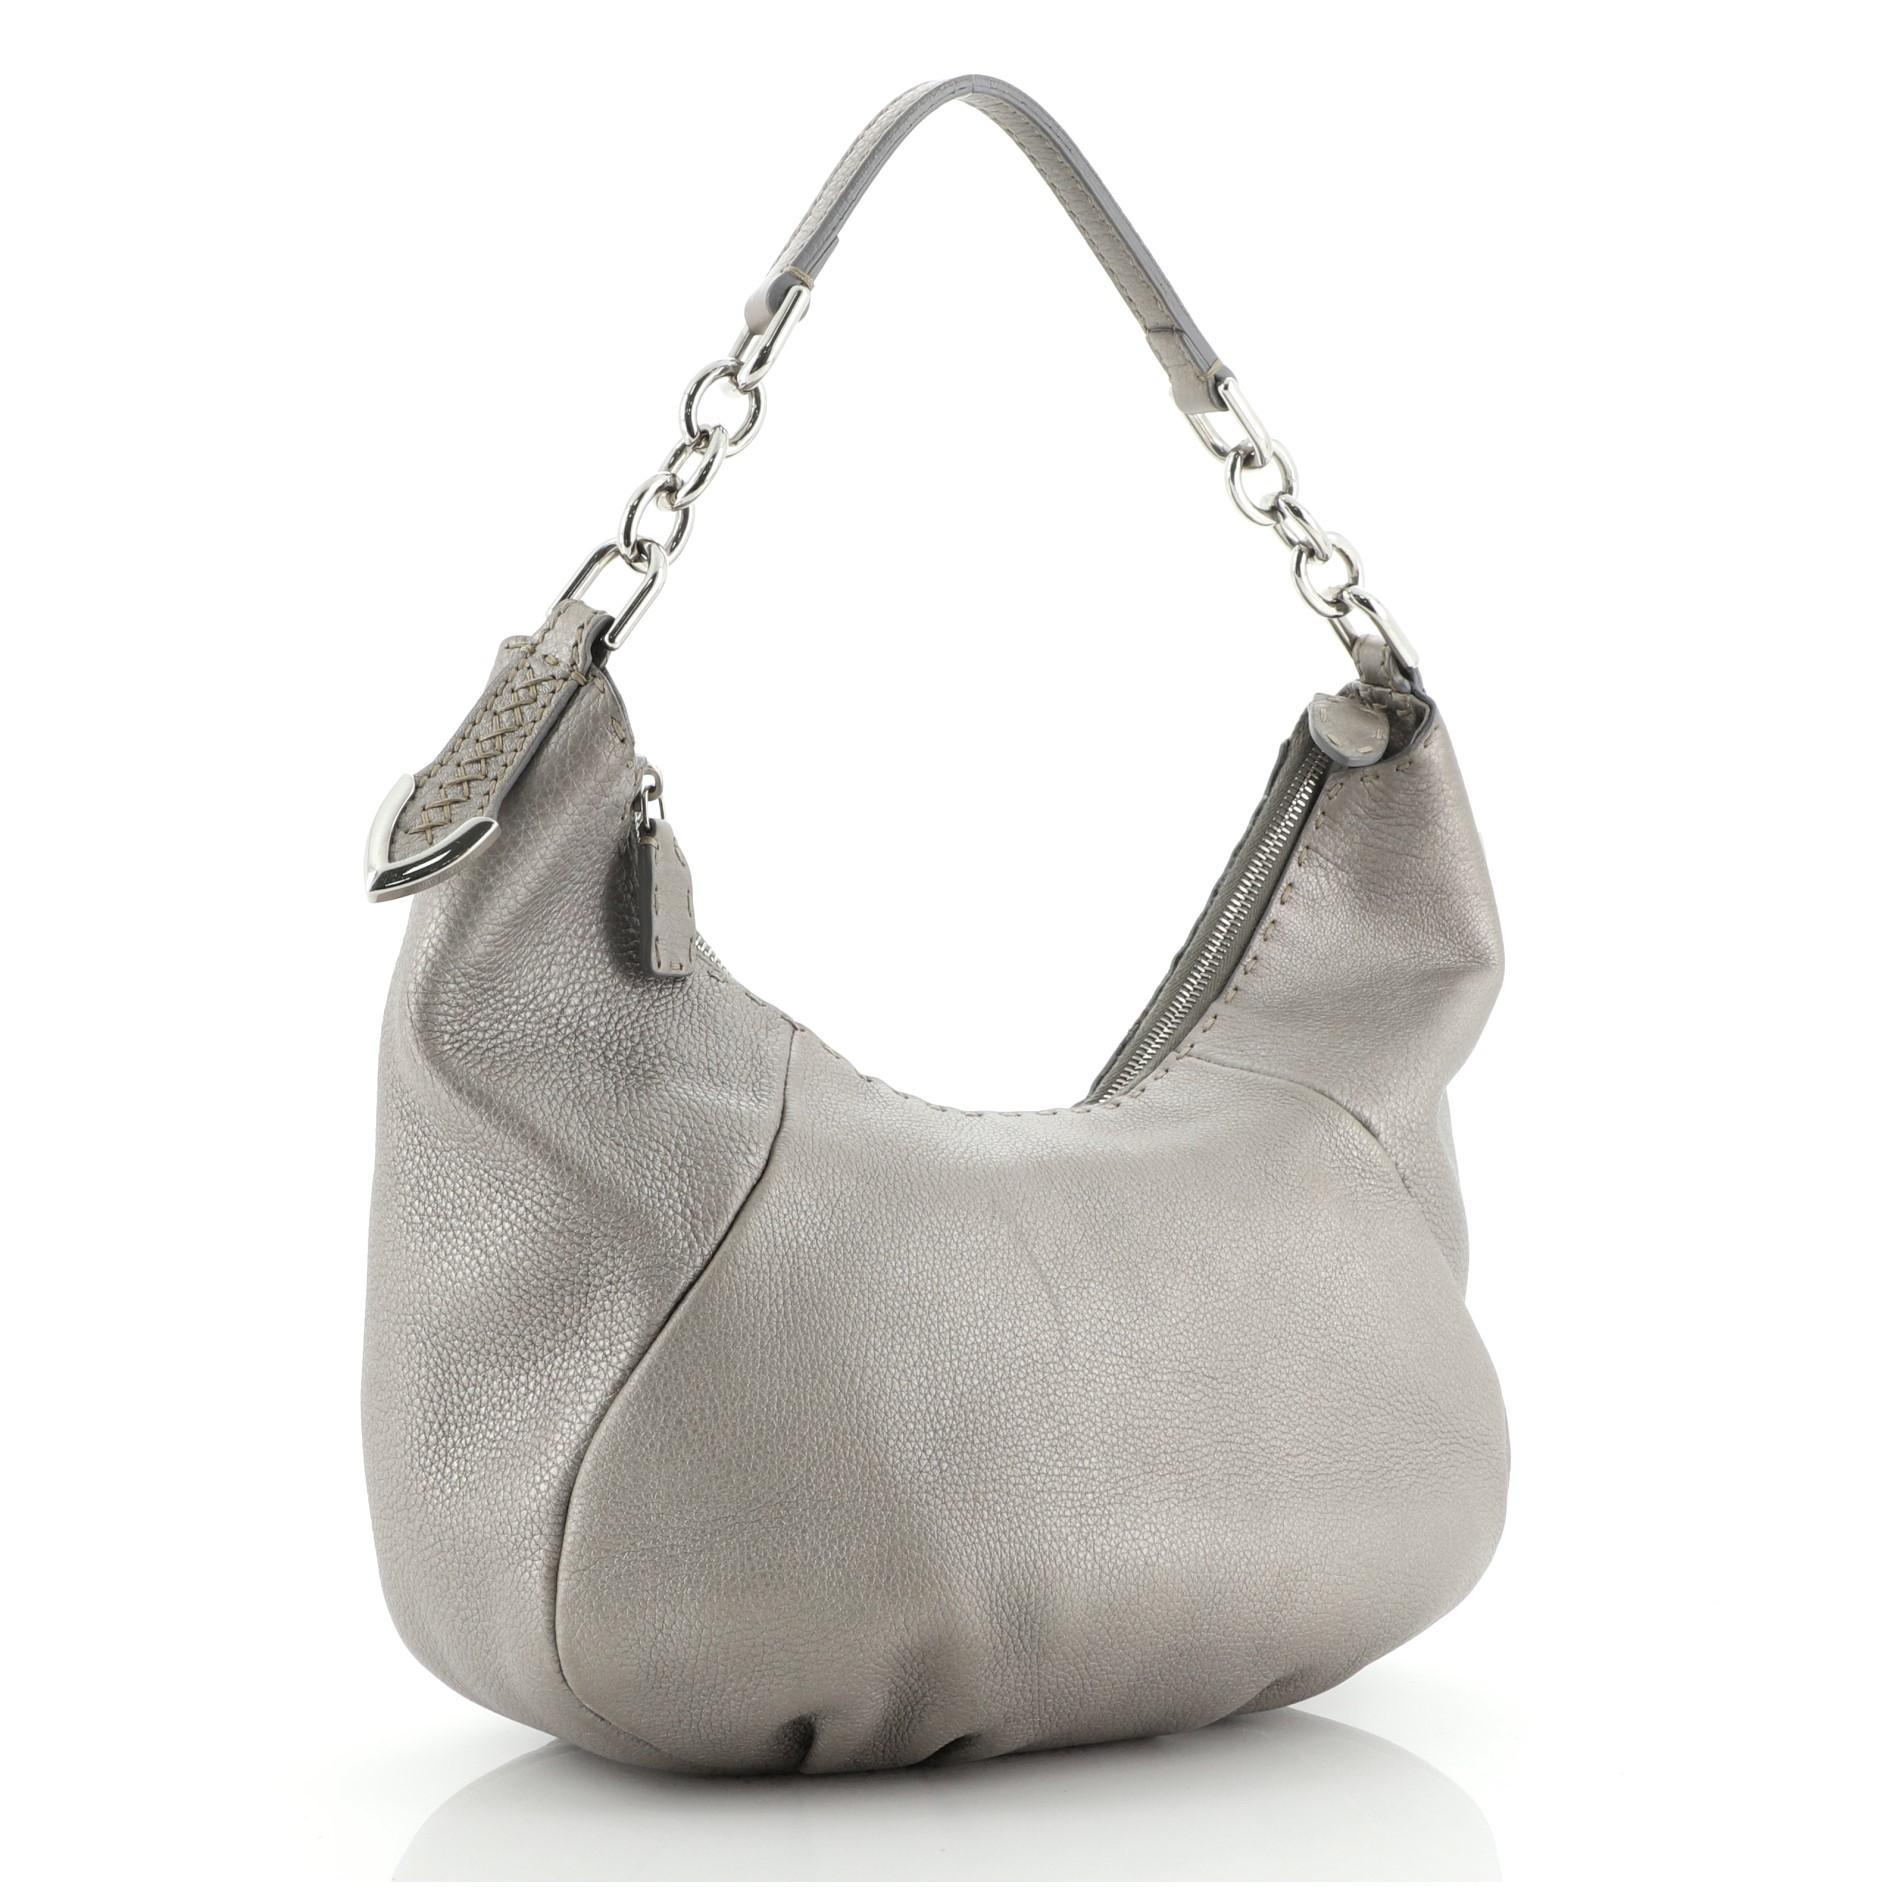 Fendi Selleria Chain Hobo Leather Small
Silver

Condition Details: Heavy splitting and cracking on strap and opening trim wax edges. Minor wear and scuffs on exterior, glue stains on opening trim, scratches on hardware.

51885MSC

Height 